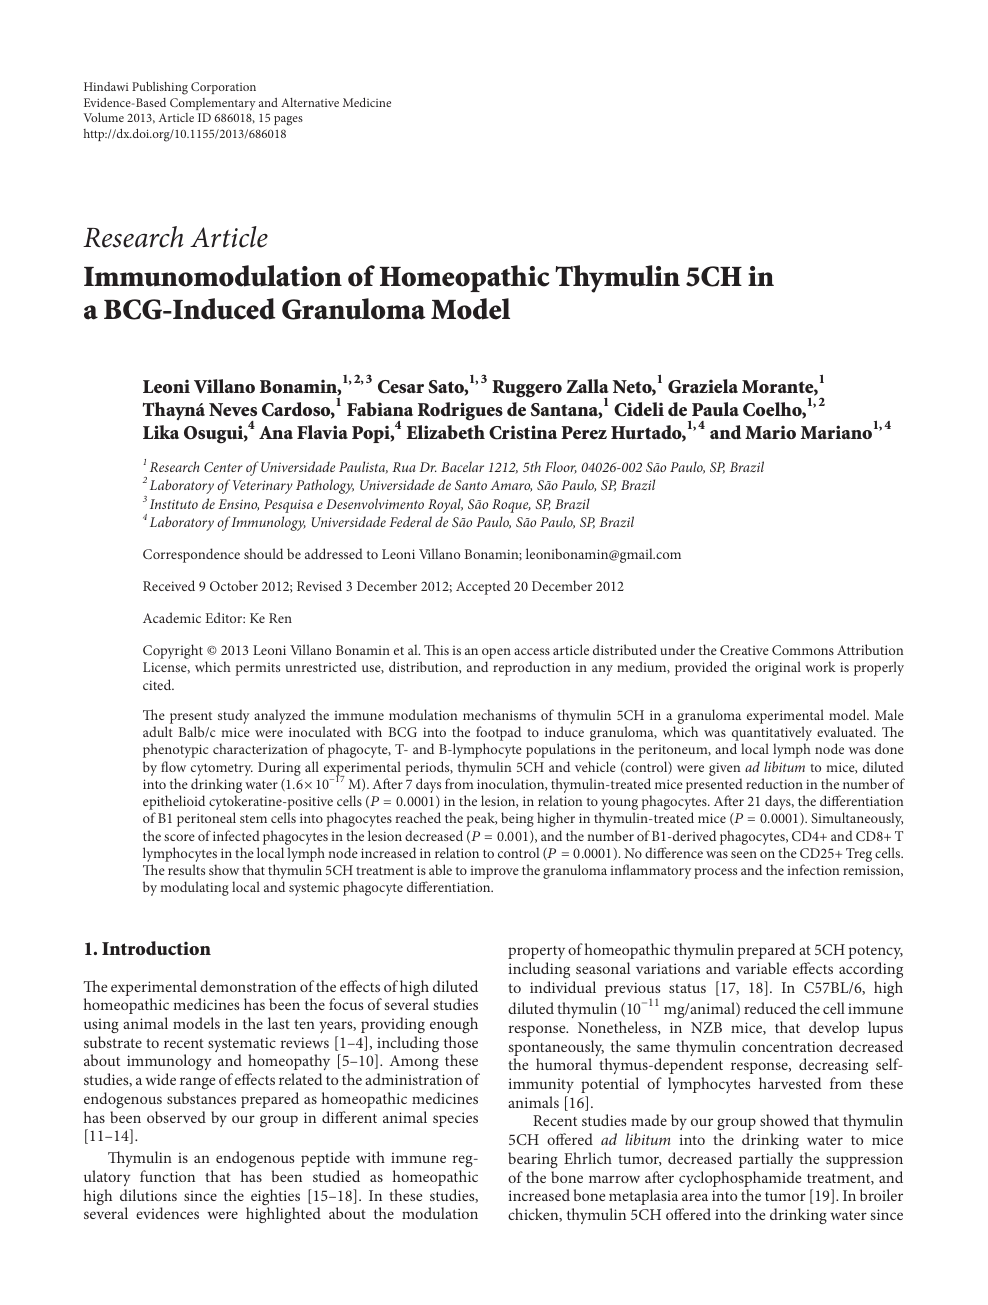 Immunomodulation Of Homeopathic Thymulin 5ch In A g Induced Granuloma Model Topic Of Research Paper In Veterinary Science Download Scholarly Article Pdf And Read For Free On Cyberleninka Open Science Hub